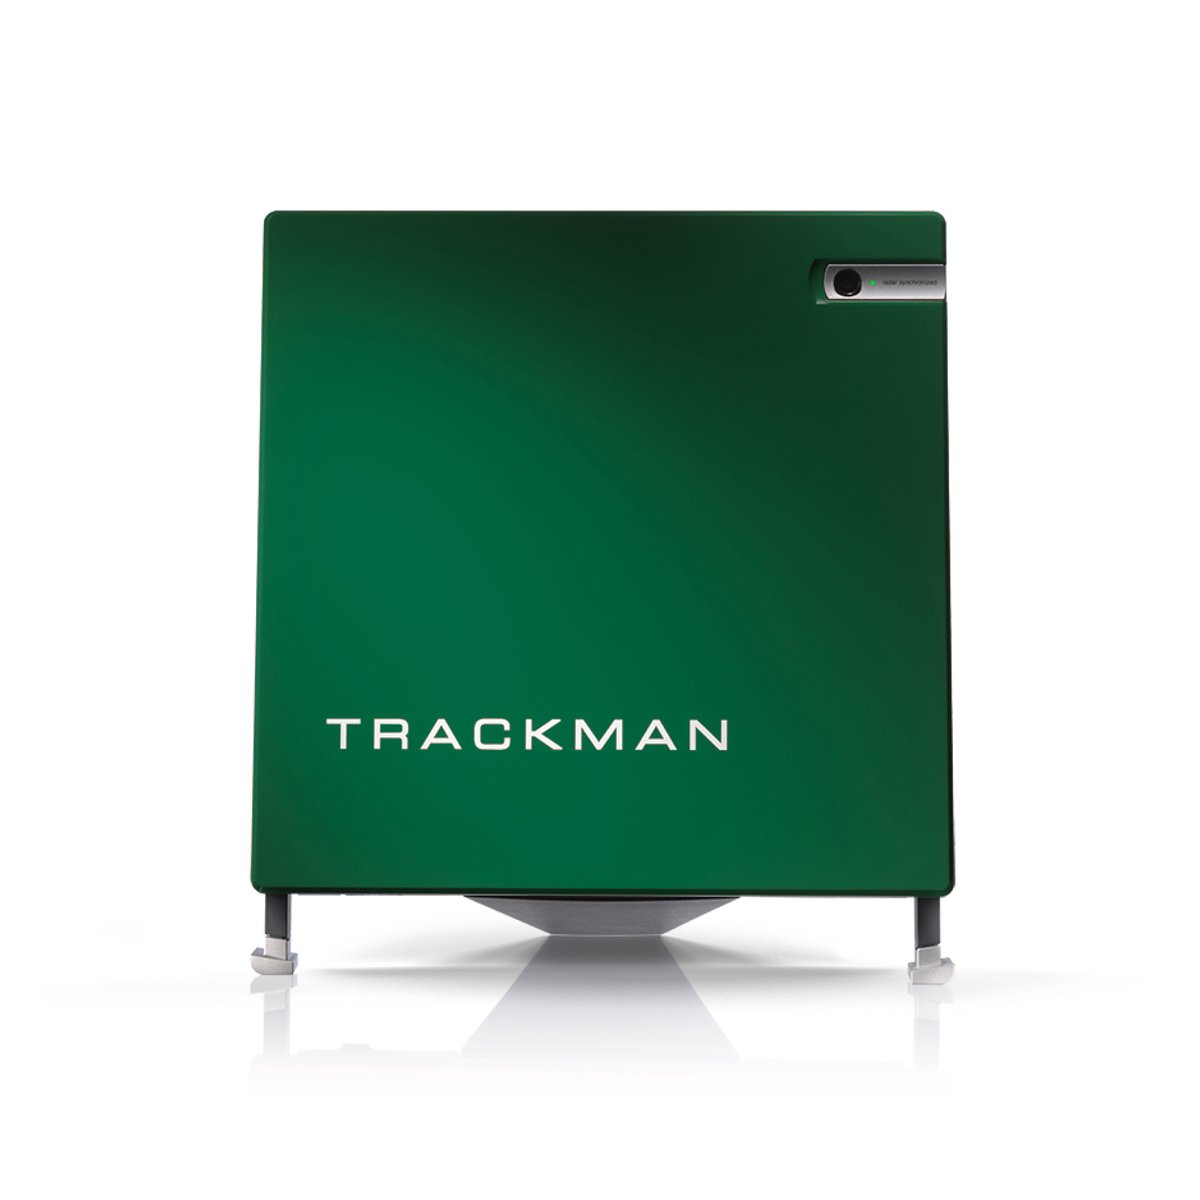 It's go time! 🟩🌸 Who's coming out on top? #Trackman #Golf #Masters